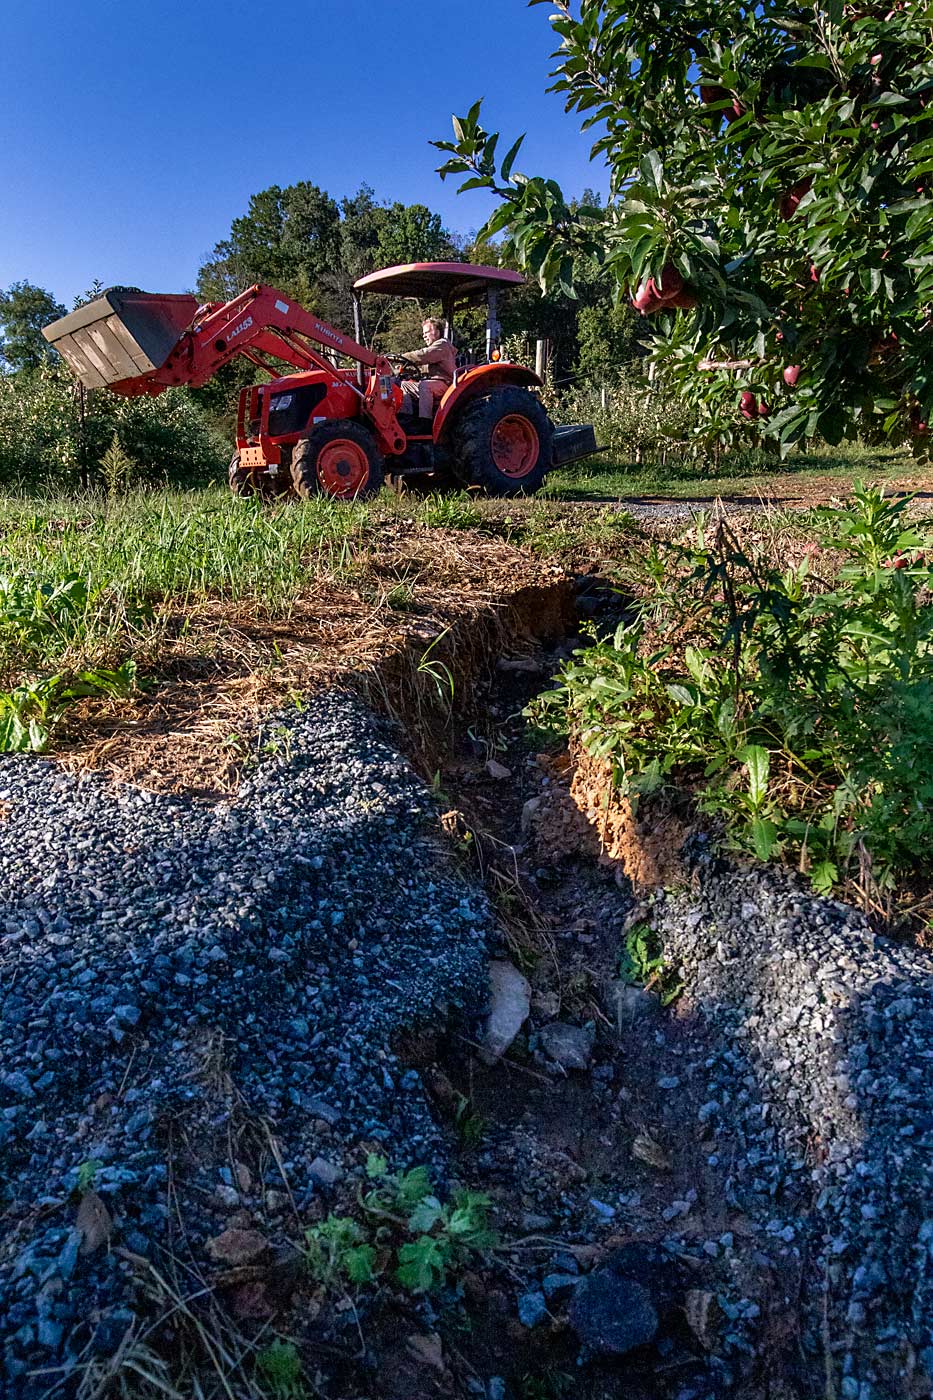 A washed-out driveway at Keim Orchards in Eastern Pennsylvania in September. Grower Richard Keim, driving the tractor, fills the rain-carved ditches with stone so bins can be placed in the field for harvest. (TJ Mullinax/Good Fruit Grower)